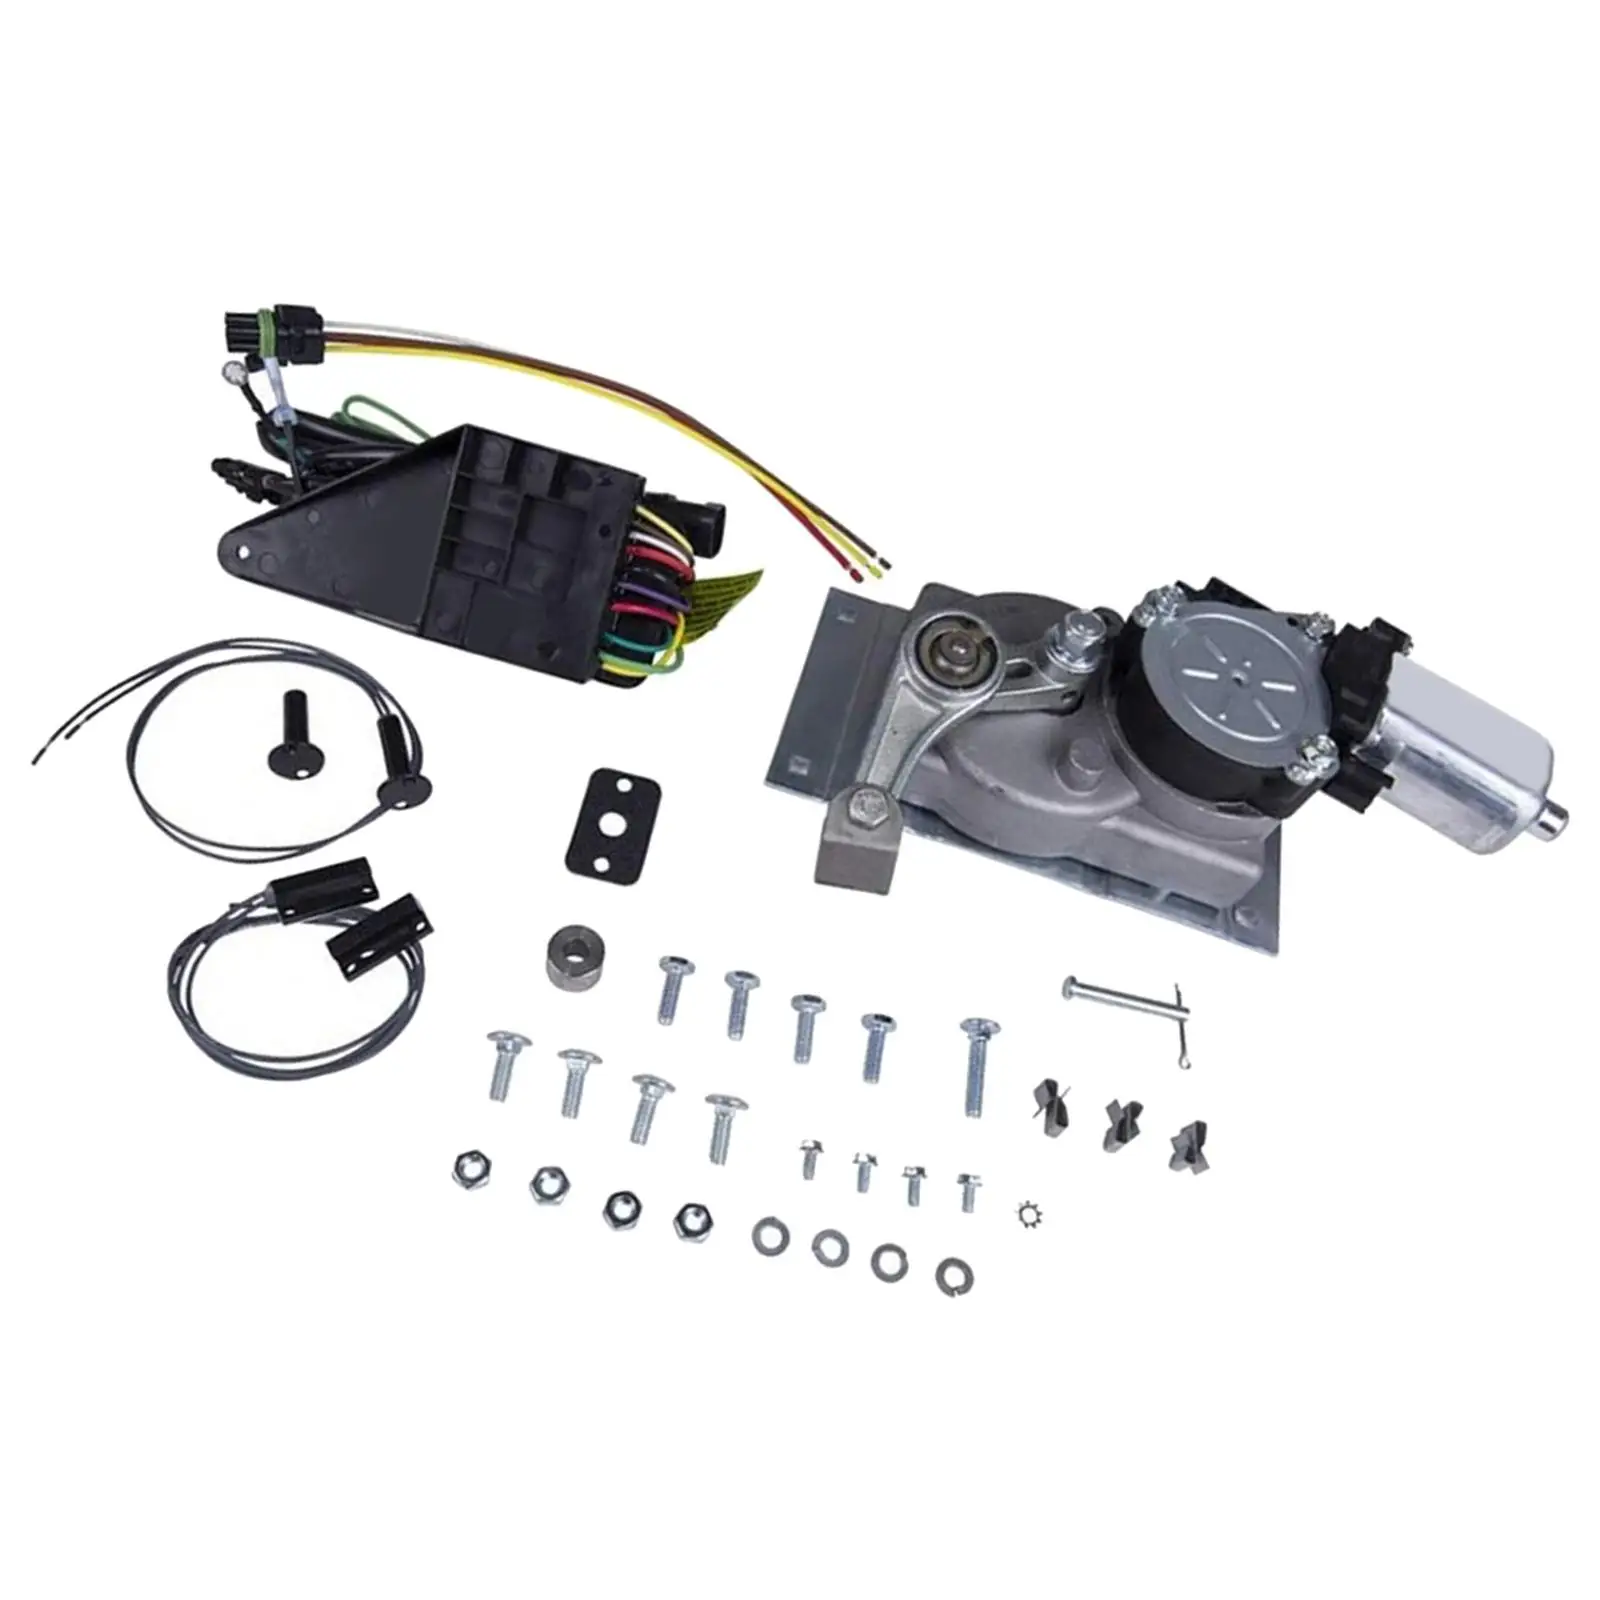 RV Trailer Step Motor Conversion Kit Motor Conversion Kit 379146 for Rvs Travel Trailers Replacement Repair Easy to Install